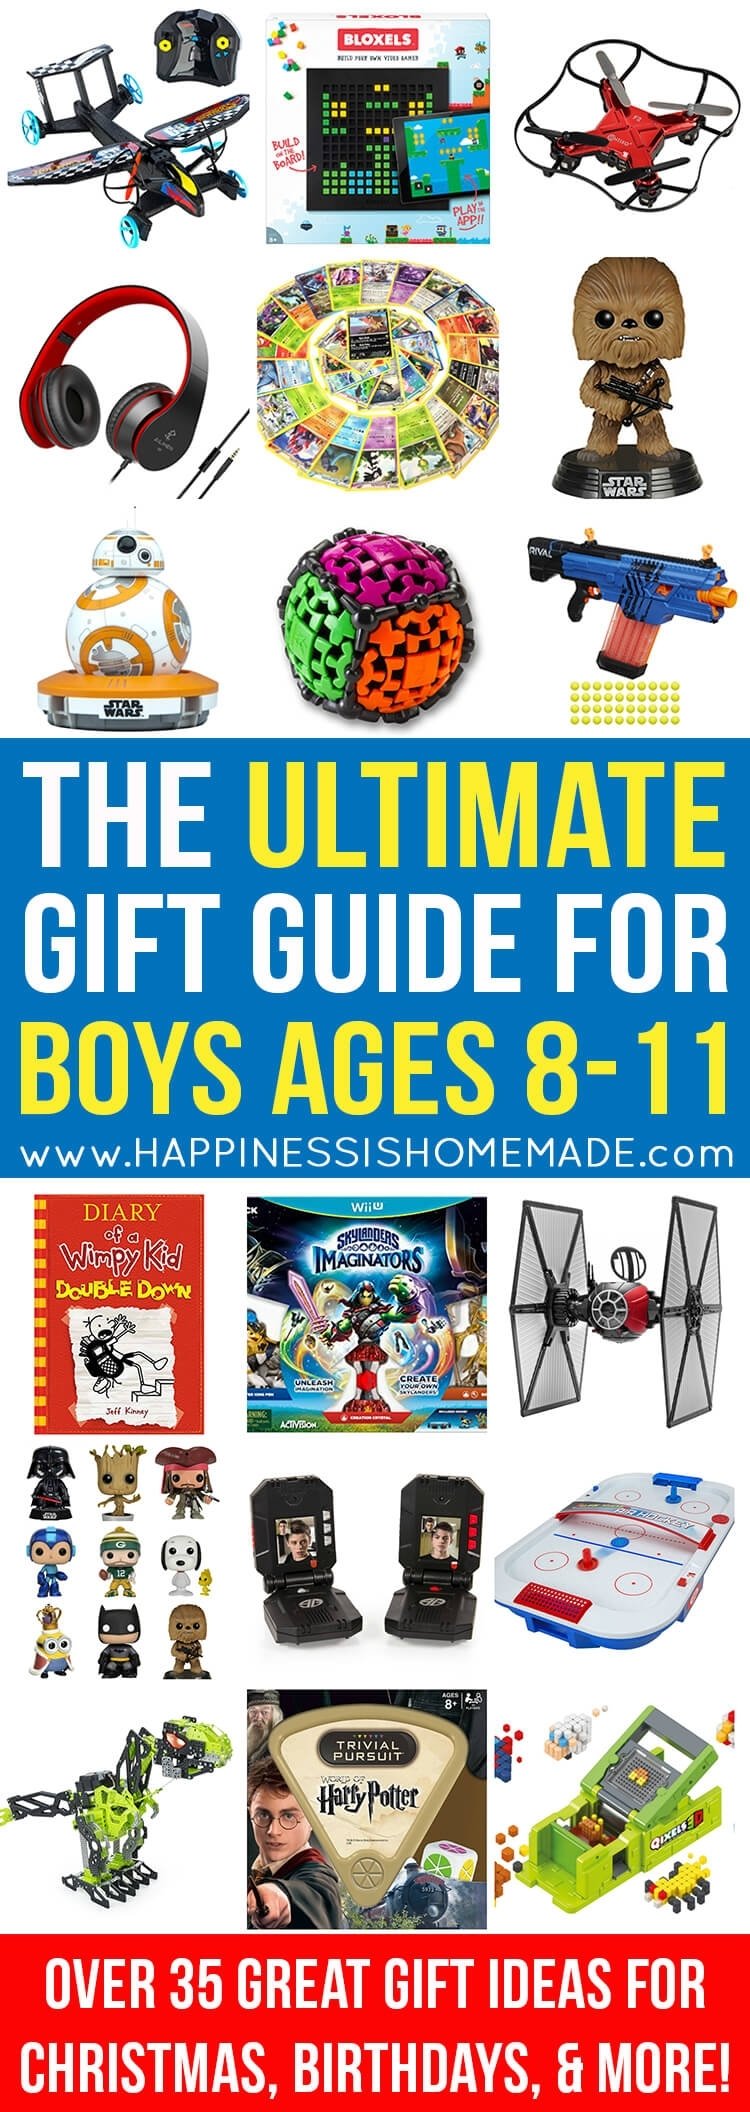 10 Best Christmas Gift Ideas For Boys the best gift ideas for boys ages 8 11 happiness is homemade 9 2022